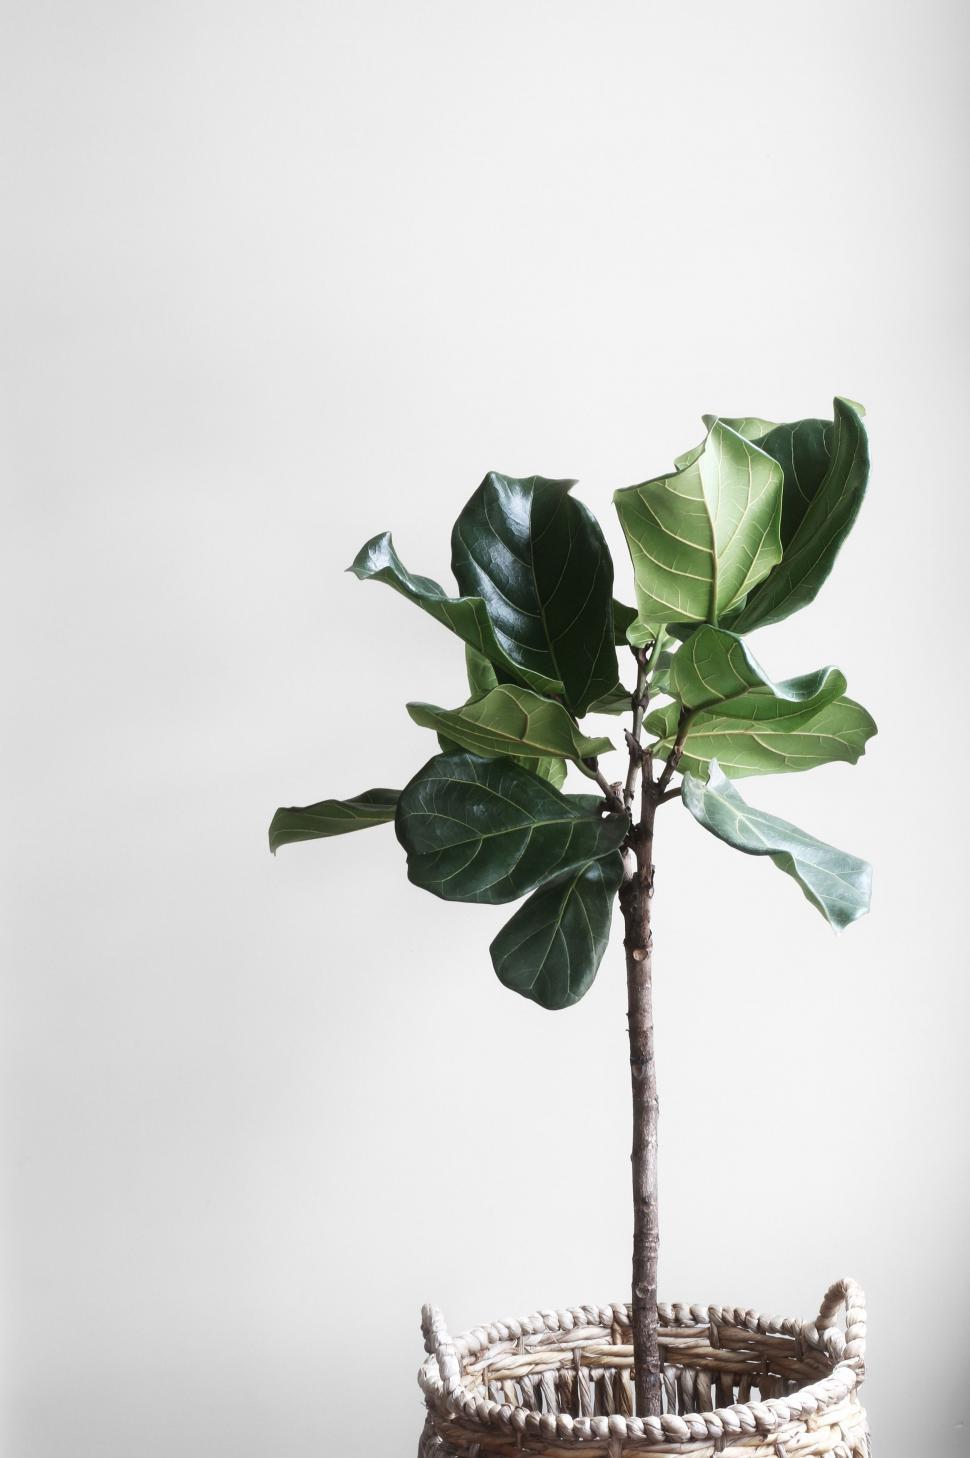 Free Image of Objects clothes suits plastic hanging shipping commerce sales plant leaf tree herb bark branch natural botany spring leaves flora garden close season flower fresh botanical growth foliage 